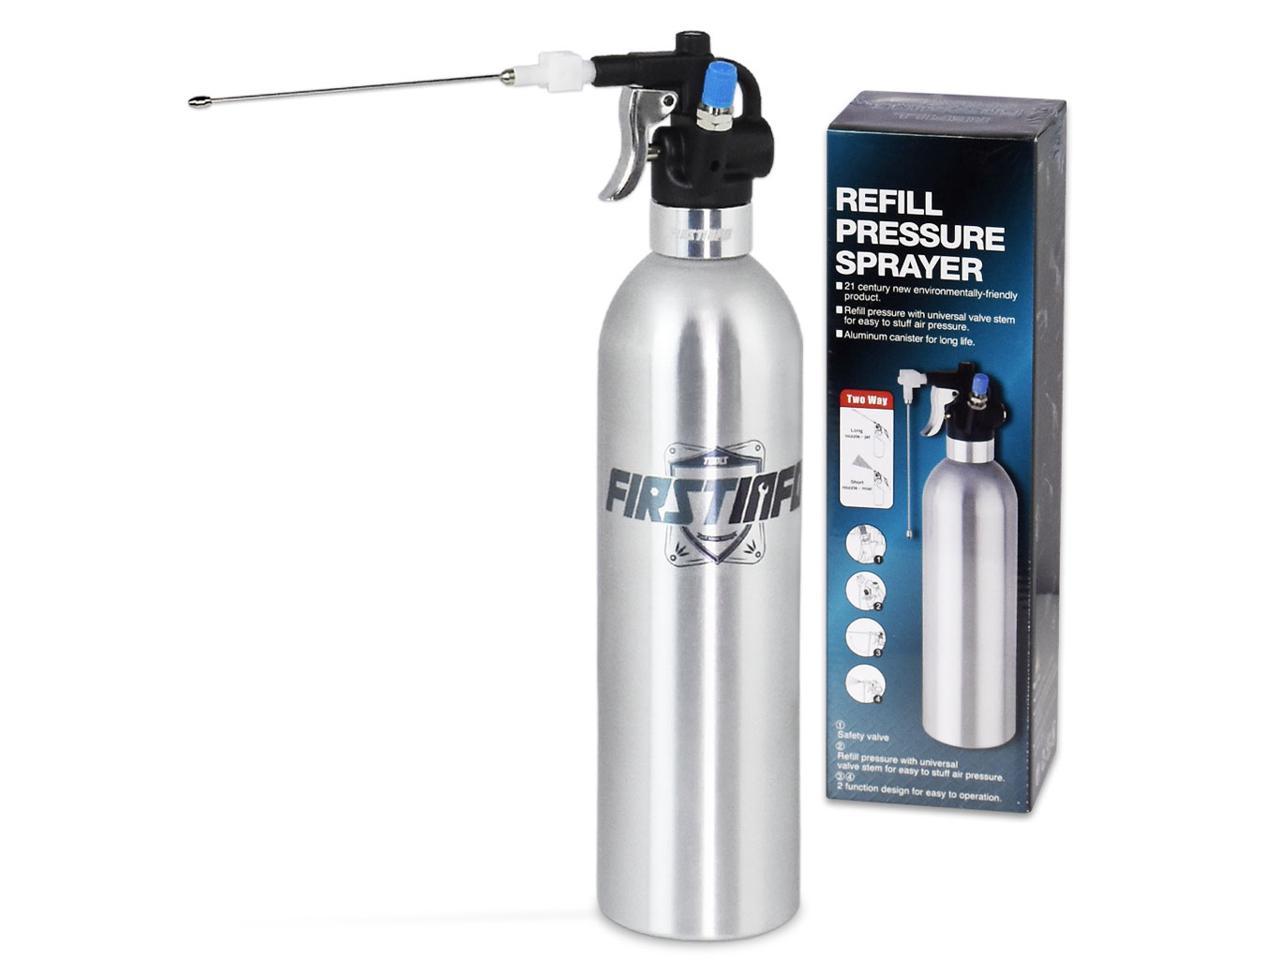 FIRSTINFO Aluminum Can Air/Pneumatic/Manual/Handy Refillable Pressure Oil/Fluid Sprayer/Compressed Areosol with 2 pcs Extra Nozzles instruction manual sprayer + Jet two way nozzle 